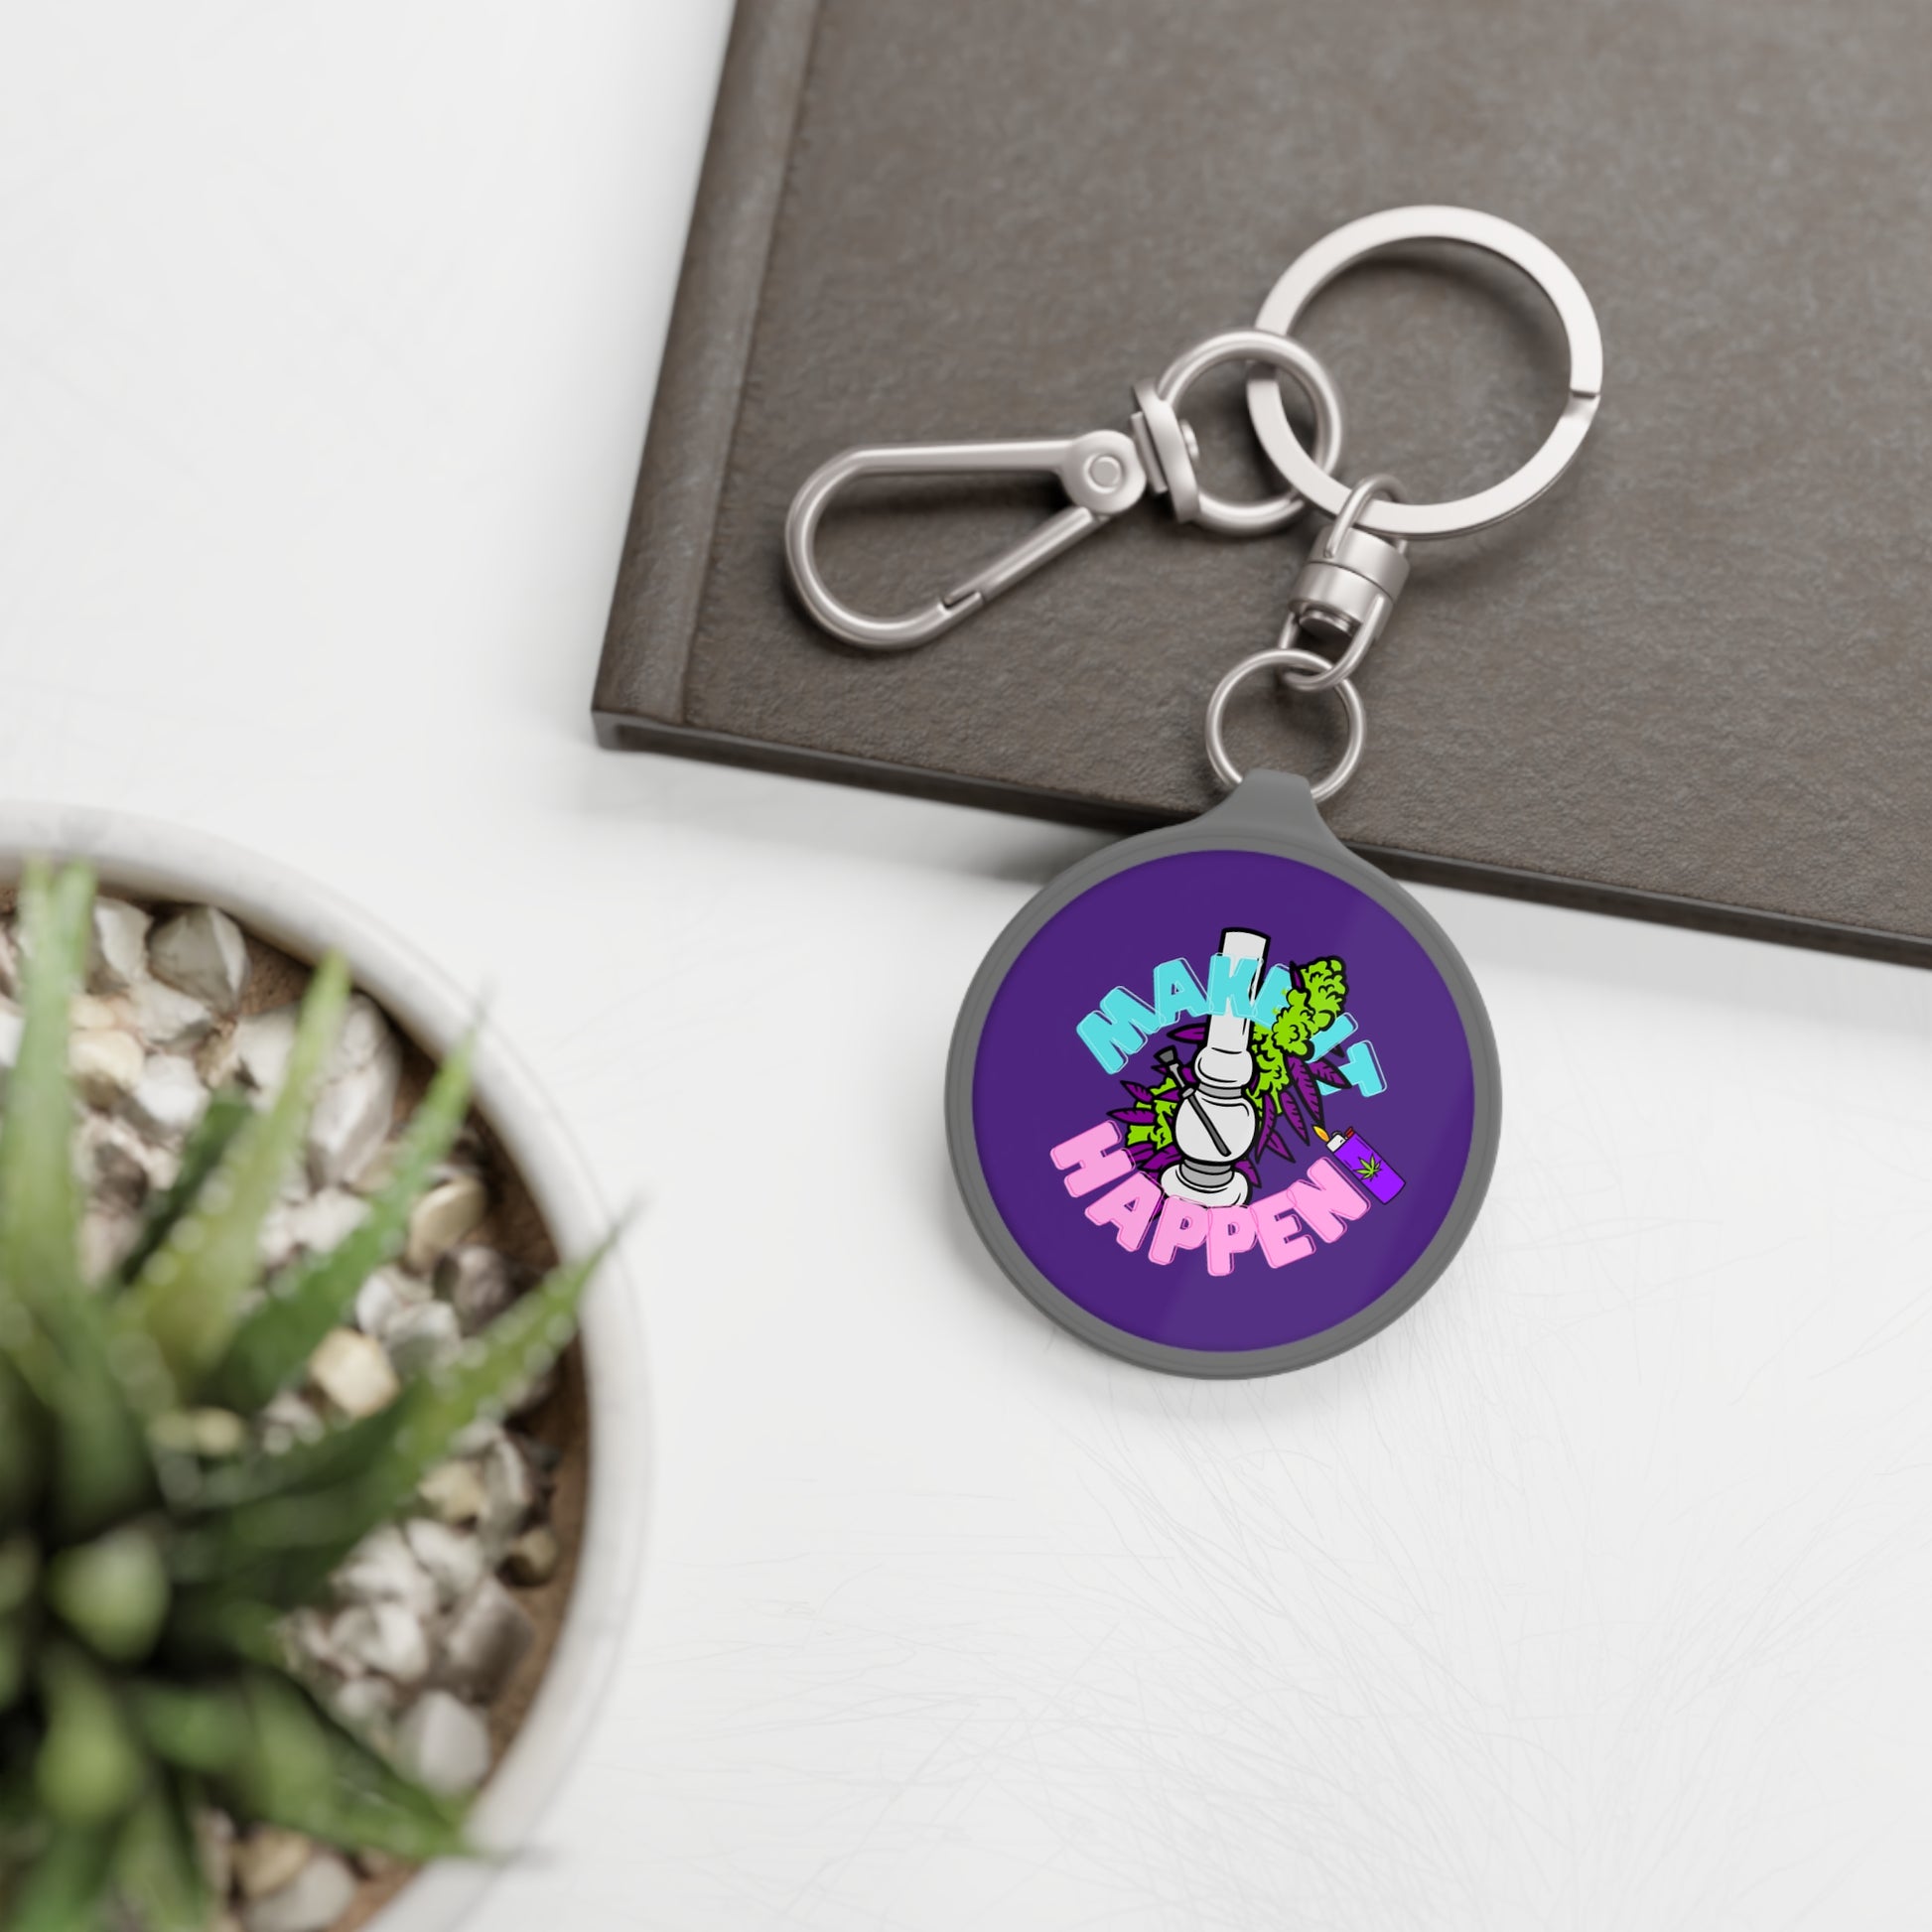 A keychain with a "Make It Happen Cannabis Keyring Tag" design next to a small potted plant and a closed notebook on a white surface.